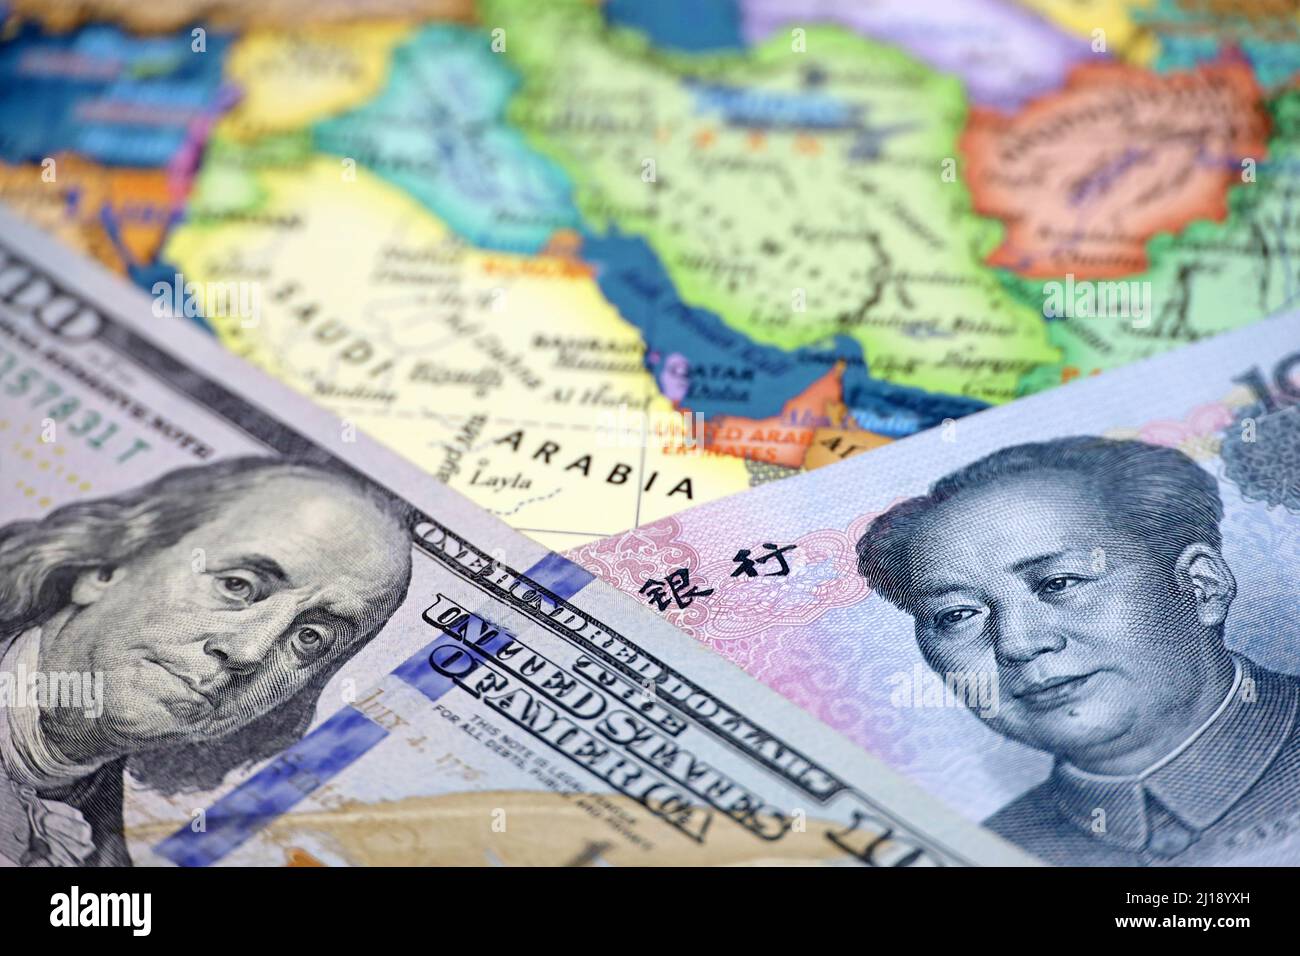 Chinese yuan and US dollars on the map of Saudi Arabia. Concept of buying oil, economic competition between China and USA in Persian Gulf countries Stock Photo